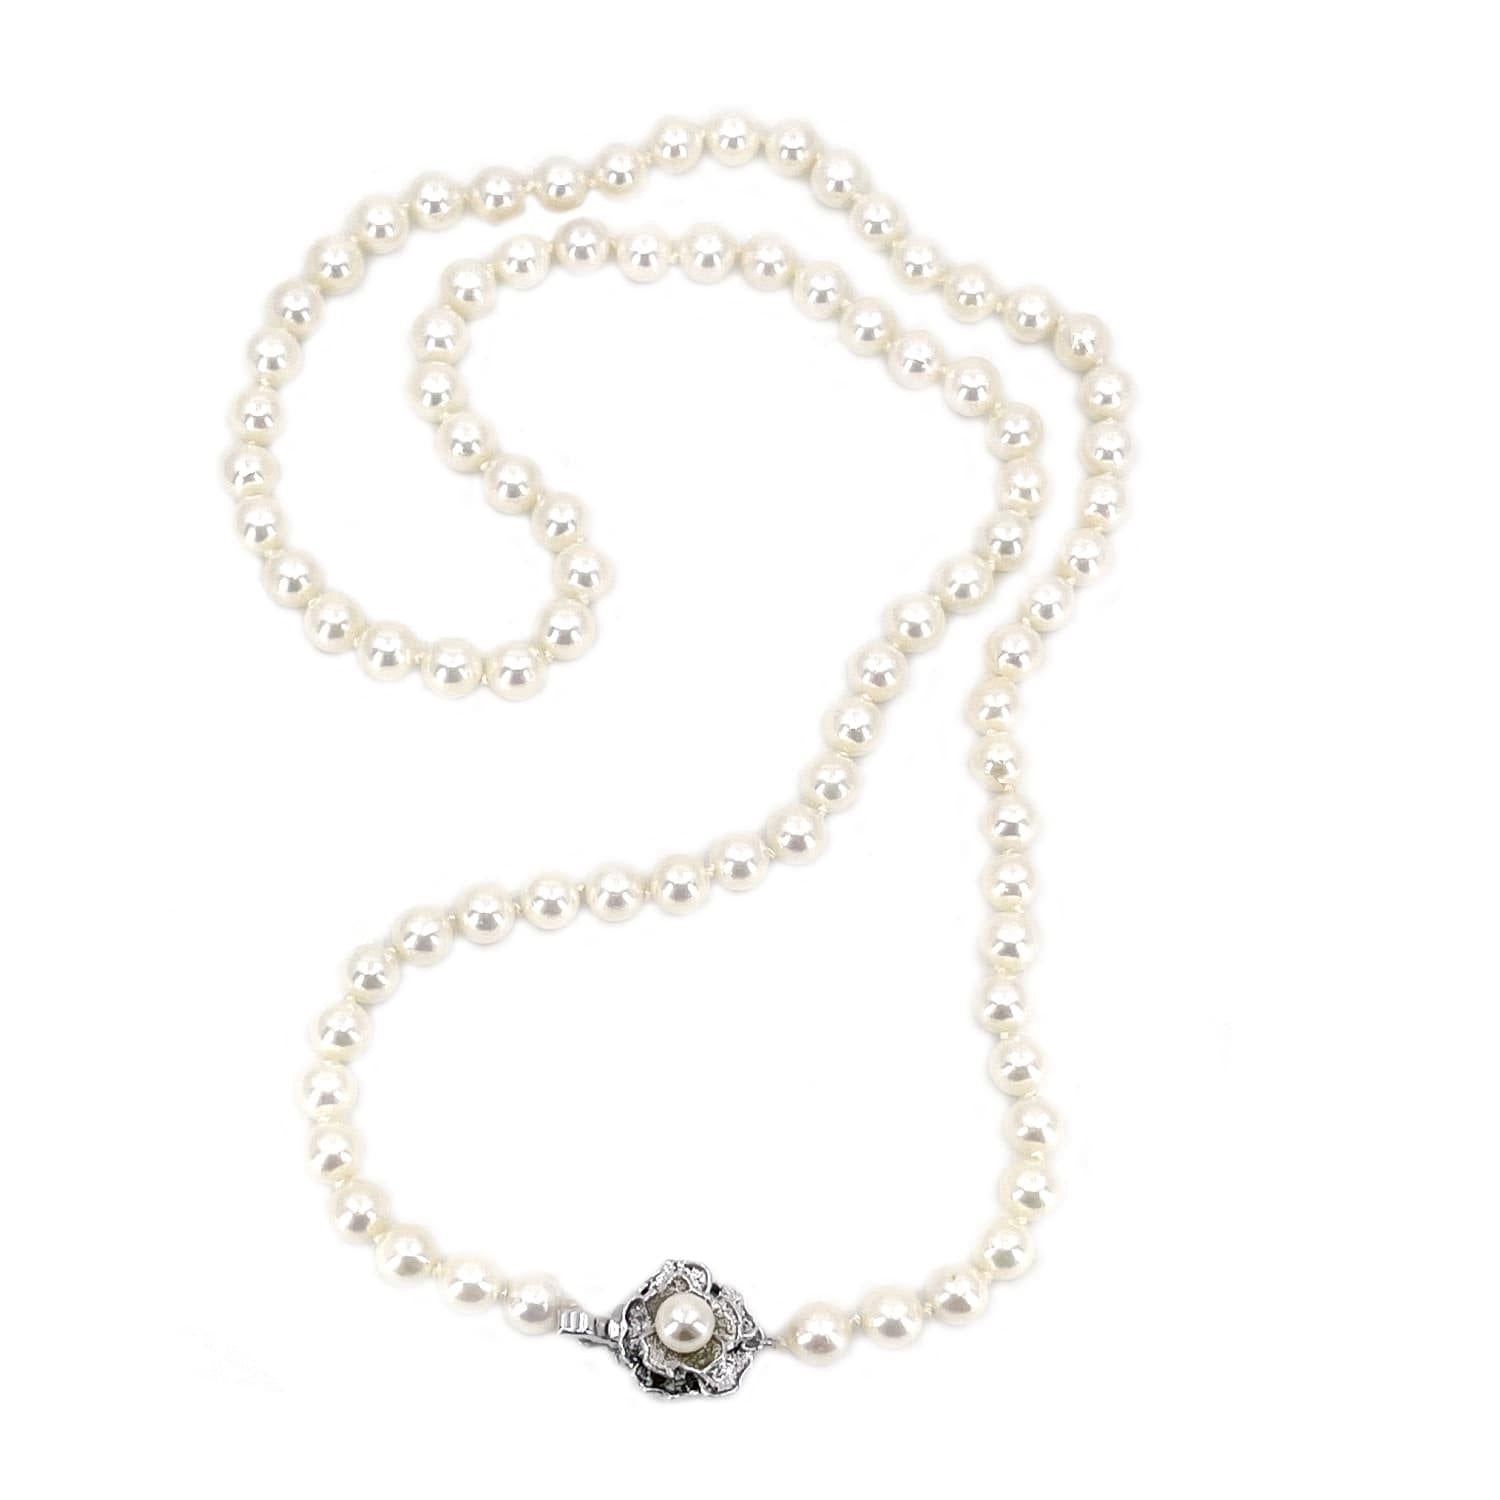 Floral Petals Japanese Cultured Akoya Pearl Necklace- Sterling Silver 23.50 Inch